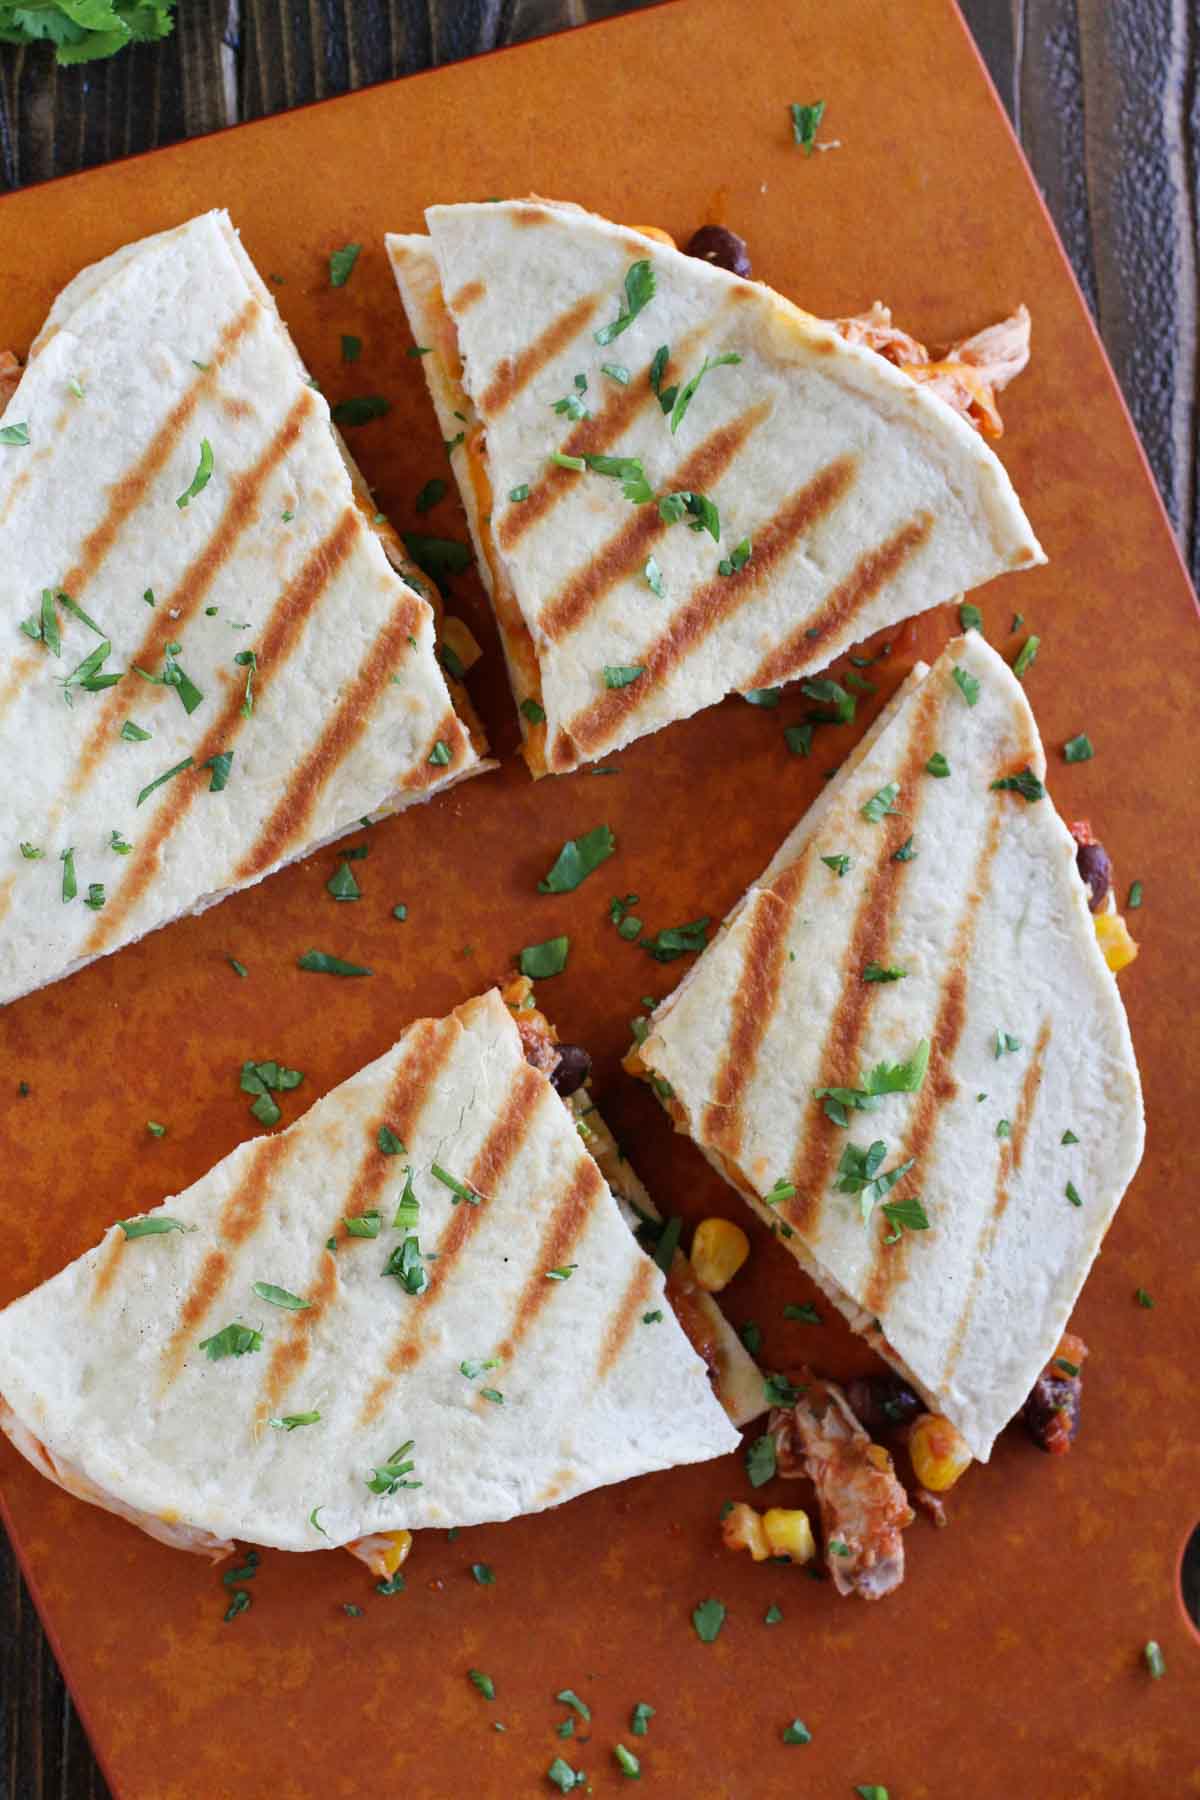 Grilled Chicken Quesadillas cut into quarters